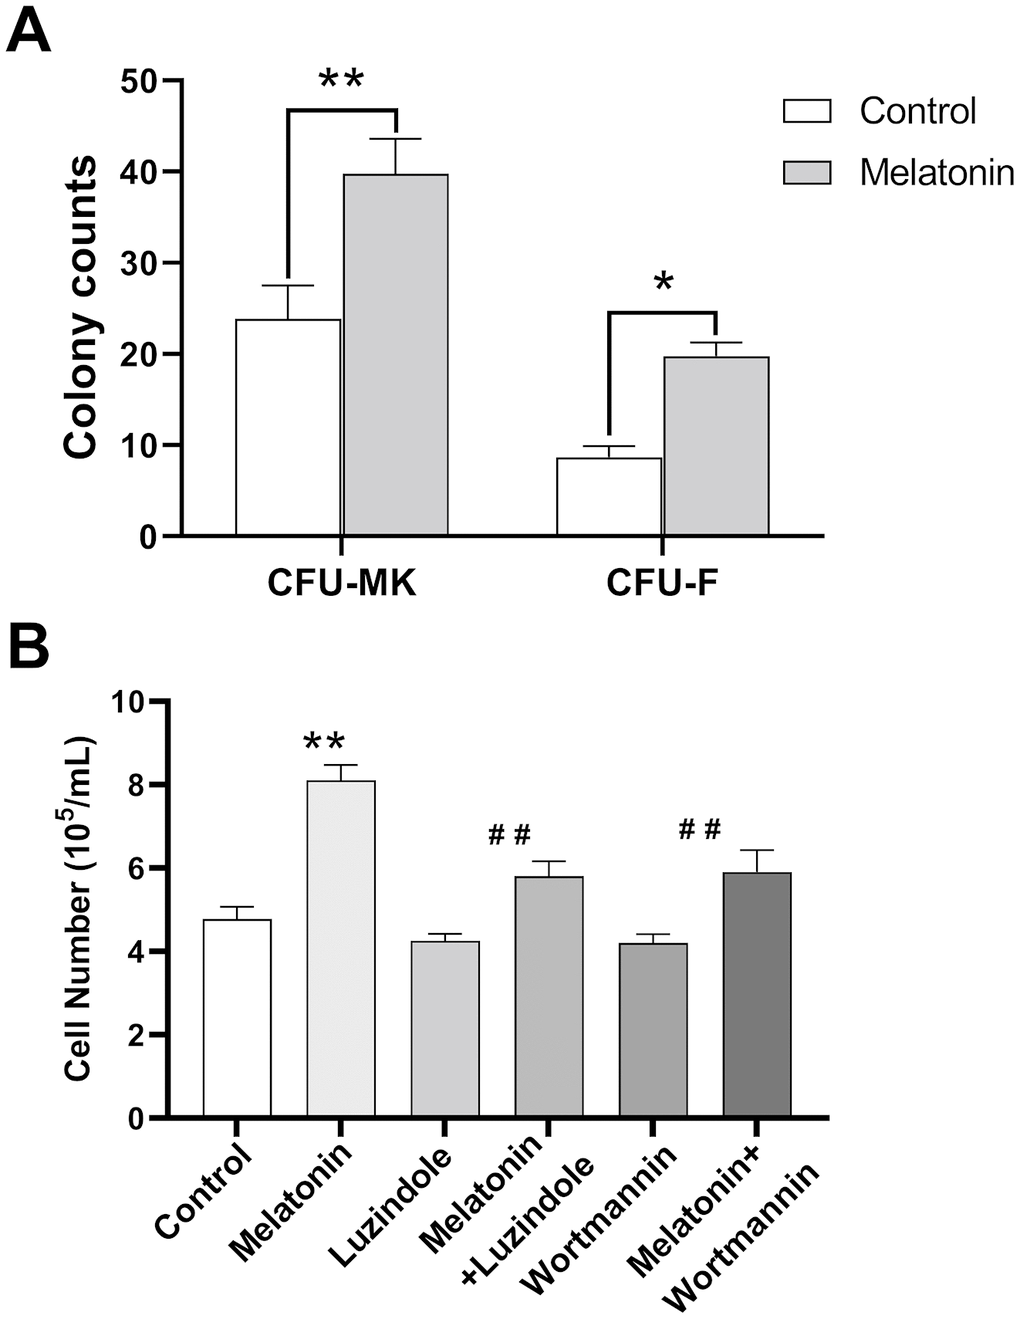 Effect of melatonin on CFU-MK, CFU-F and CHRF cells. Bone marrow cells were seeded with or without melatonin (200 nM) for nine days and identified by Giemsa staining. CHRF cells were treated with melatonin (200 nM), wortmannin (100 nM), melatonin+wortmannin, luzindole (1 μM) and melatonin+luzindole. A 30 min preincubation step with the PI3K inhibitor Wortmannin (100 nM) or a 60 min preincubation step with the MT2 receptor antagonist Luzindole (1 μM) was included before melatonin stimulation. (A) Melatonin promotes the formation of murine CFU-MK and CFU-F. (B) Melatonin has a promoting effect on the proliferation of CHRF cells, adding wortmannin and luzindole can inhibit this effect. Two-way ANOVA (with a Tukey multiple comparison test) was employed to test for significance. * p